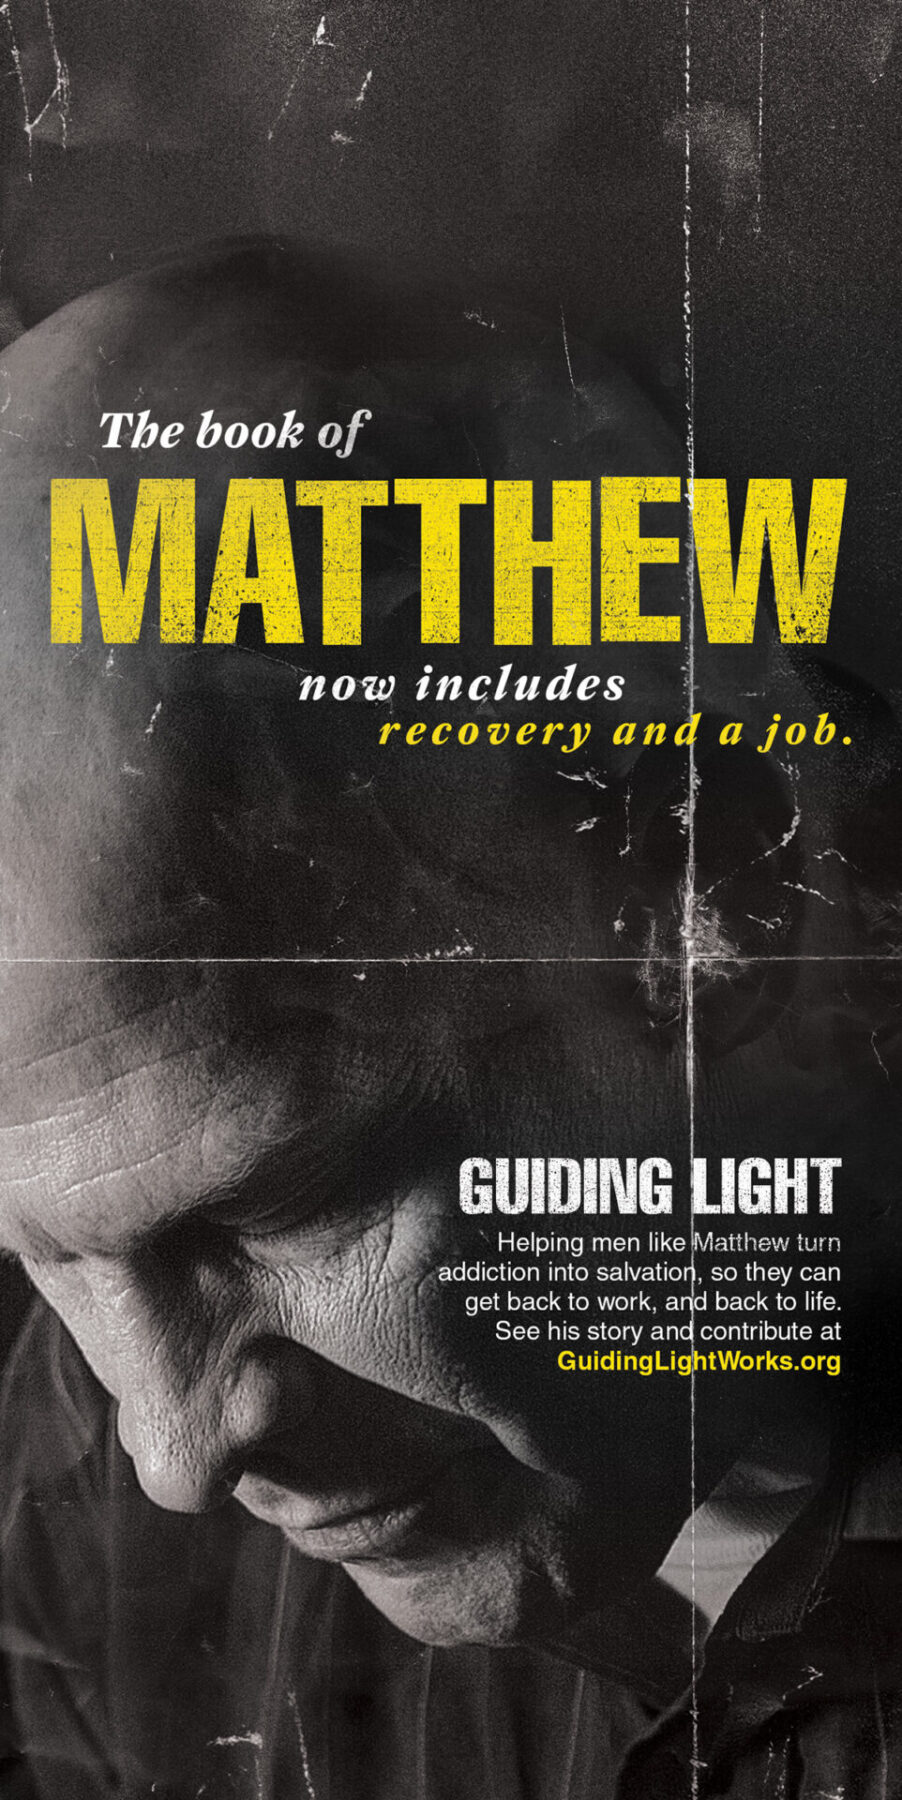 Out of home mall kiosk advertisement with closeup black and white photo of a man and the headline "The book of Matthew now includes recovery and a job."